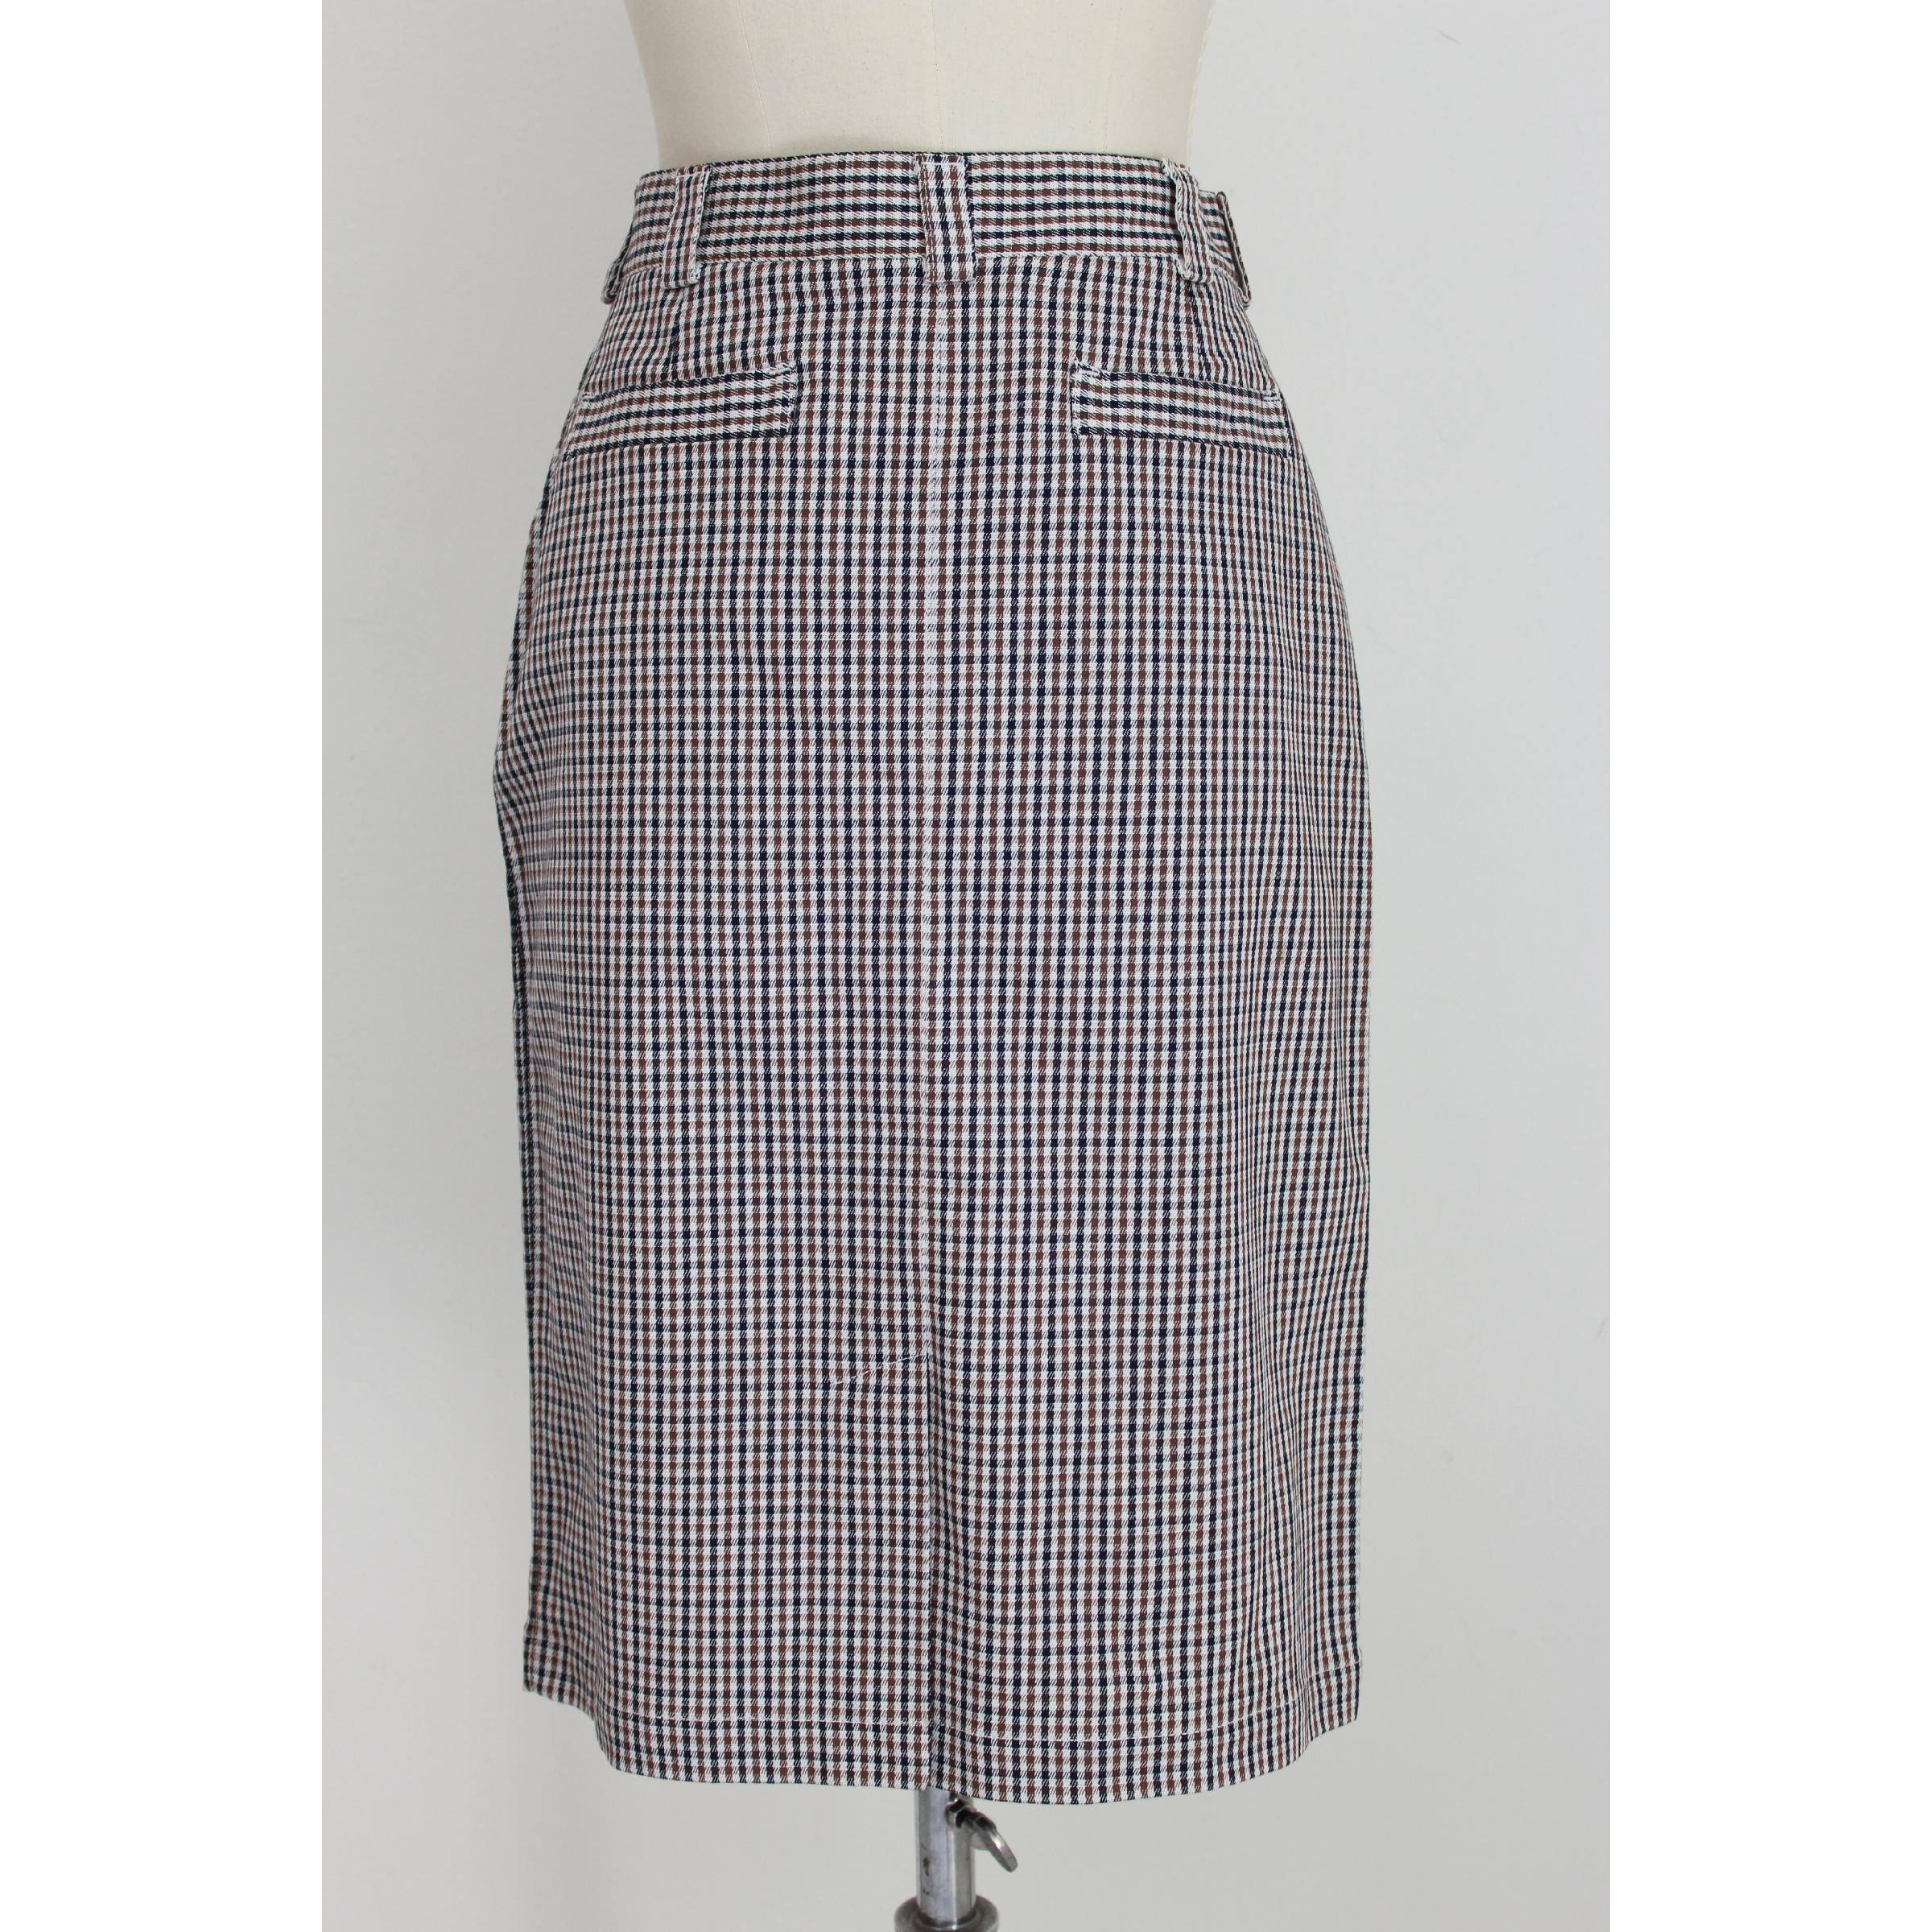 Aquascutum classic vintage skirt, beige and blu checked, 95% cotton 4% polyamide 1% elastene. Pockets on the sides, zip and button closure. 2000s. Made in England

Size: 42 It 8 Us 10 Uk

Waist: 38 cm
Length: 65 cm